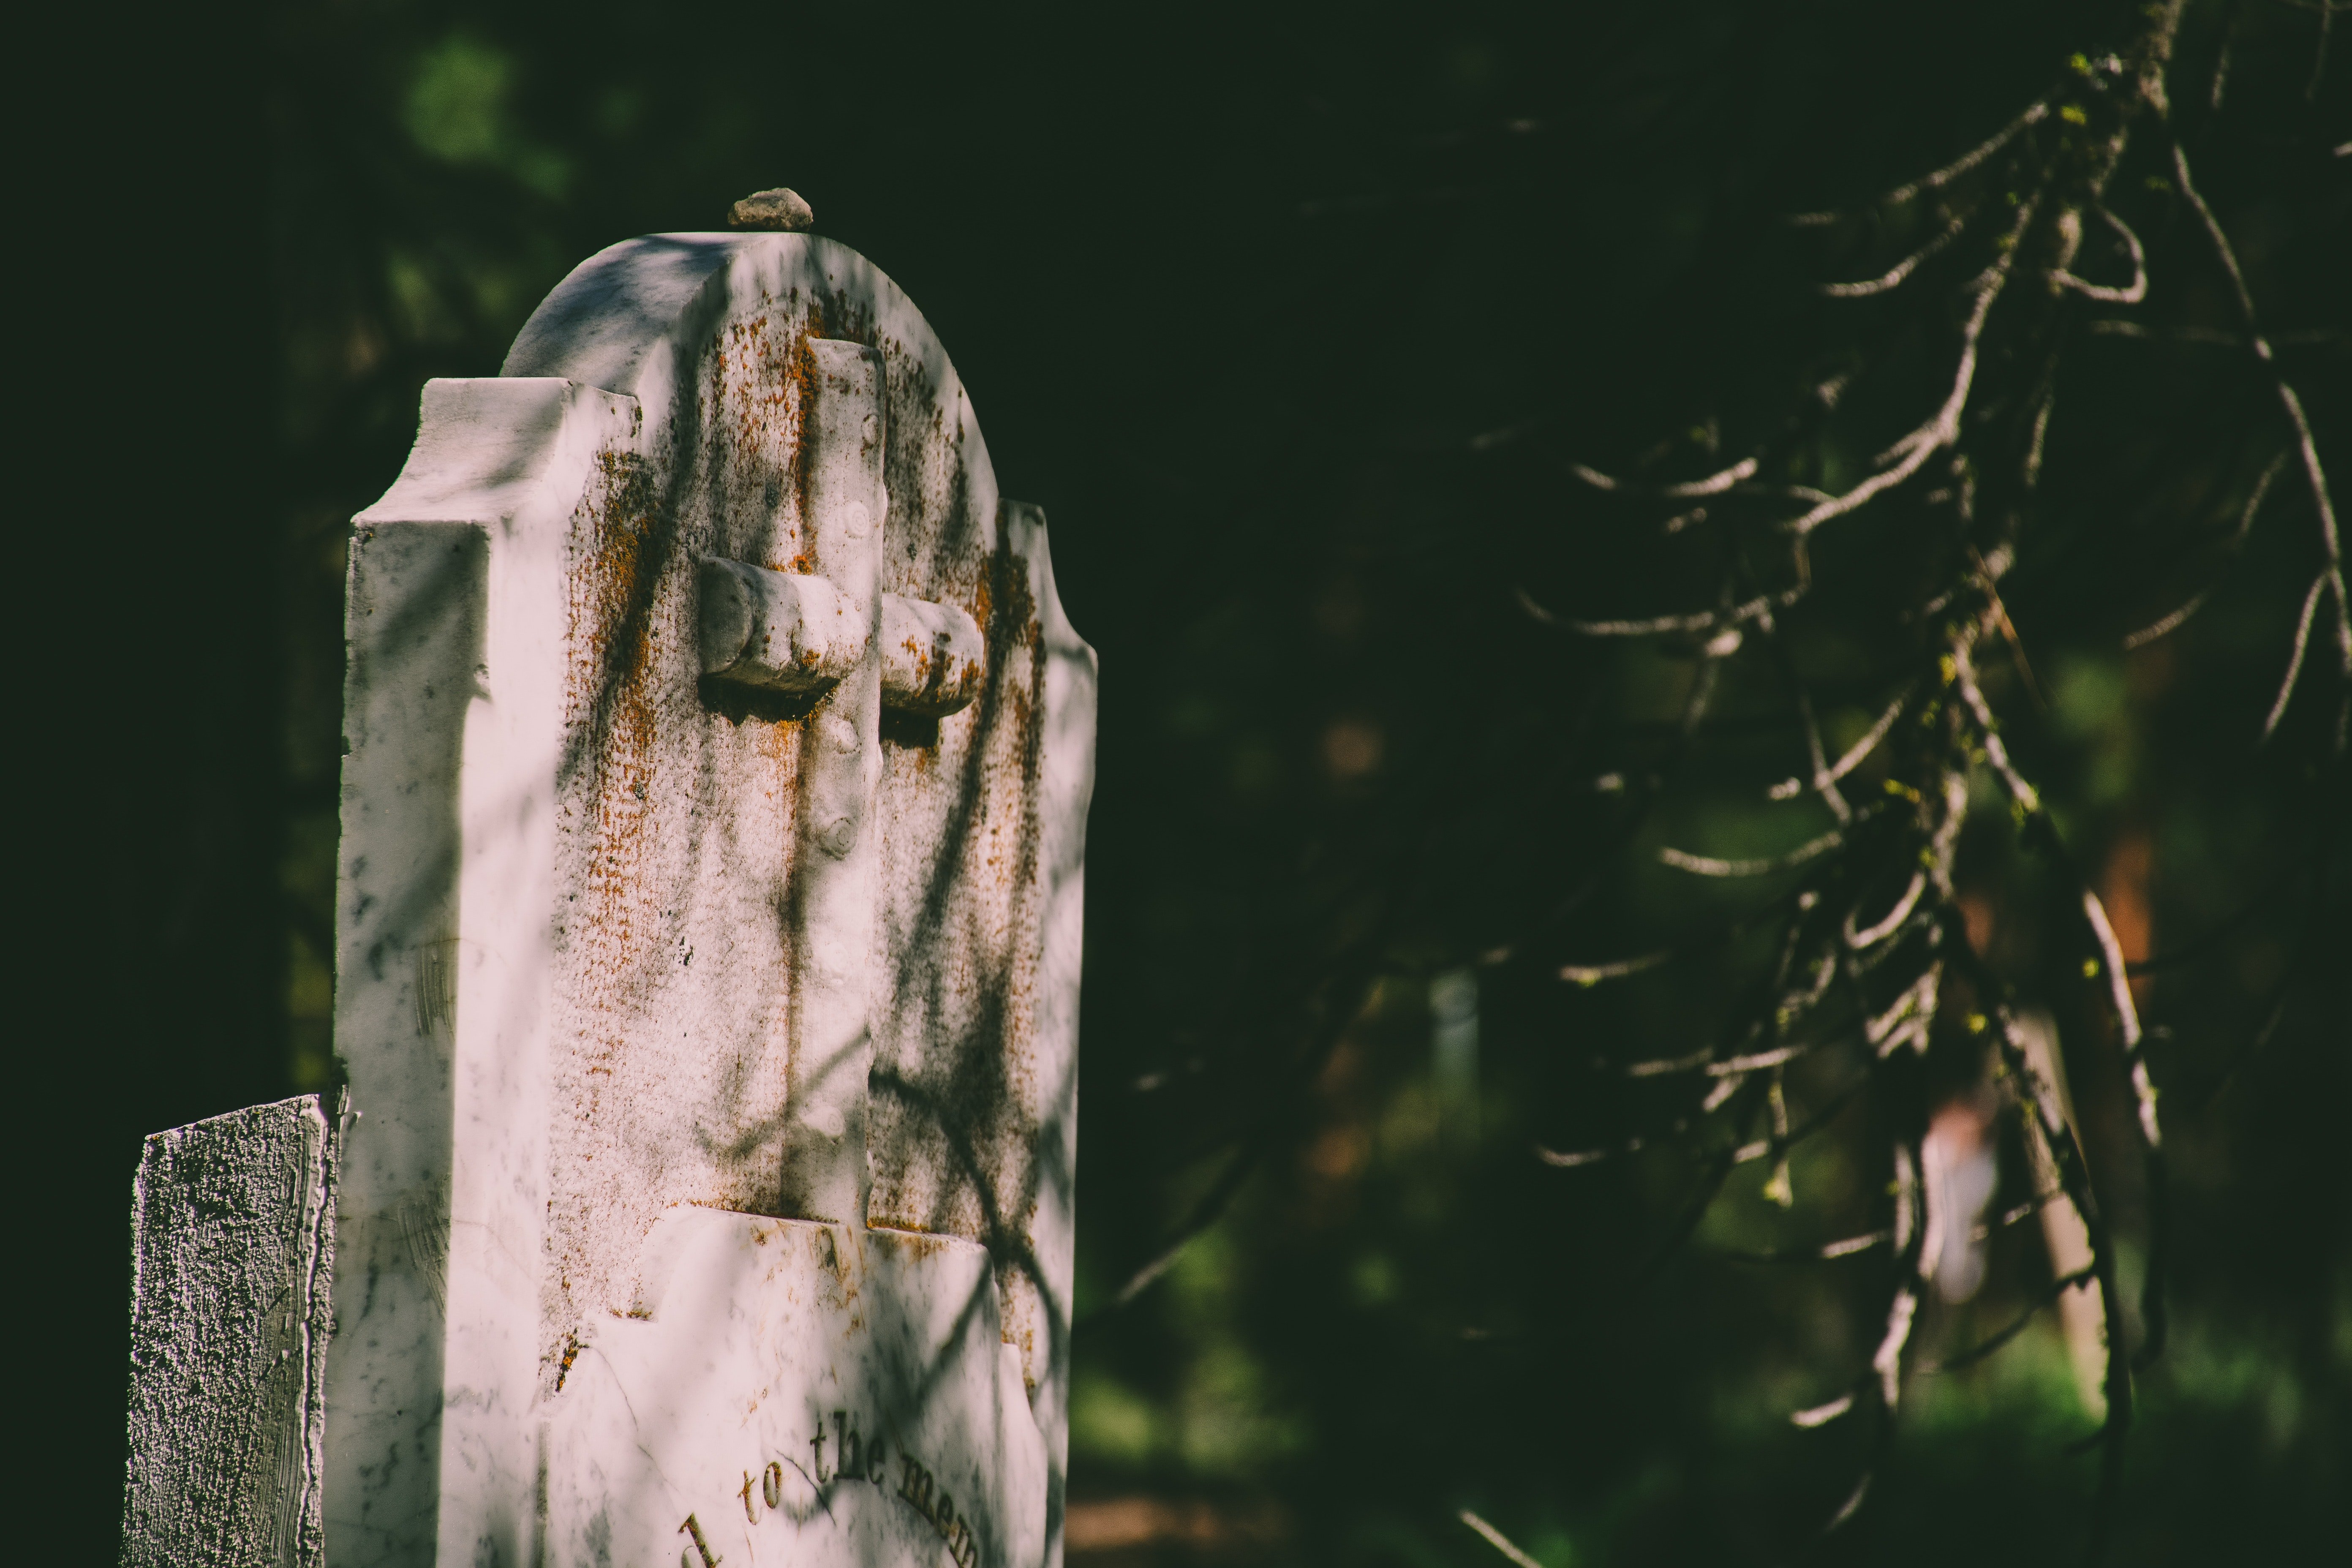 He decided he never wanted to visit his father's grave. | Source: Pexels